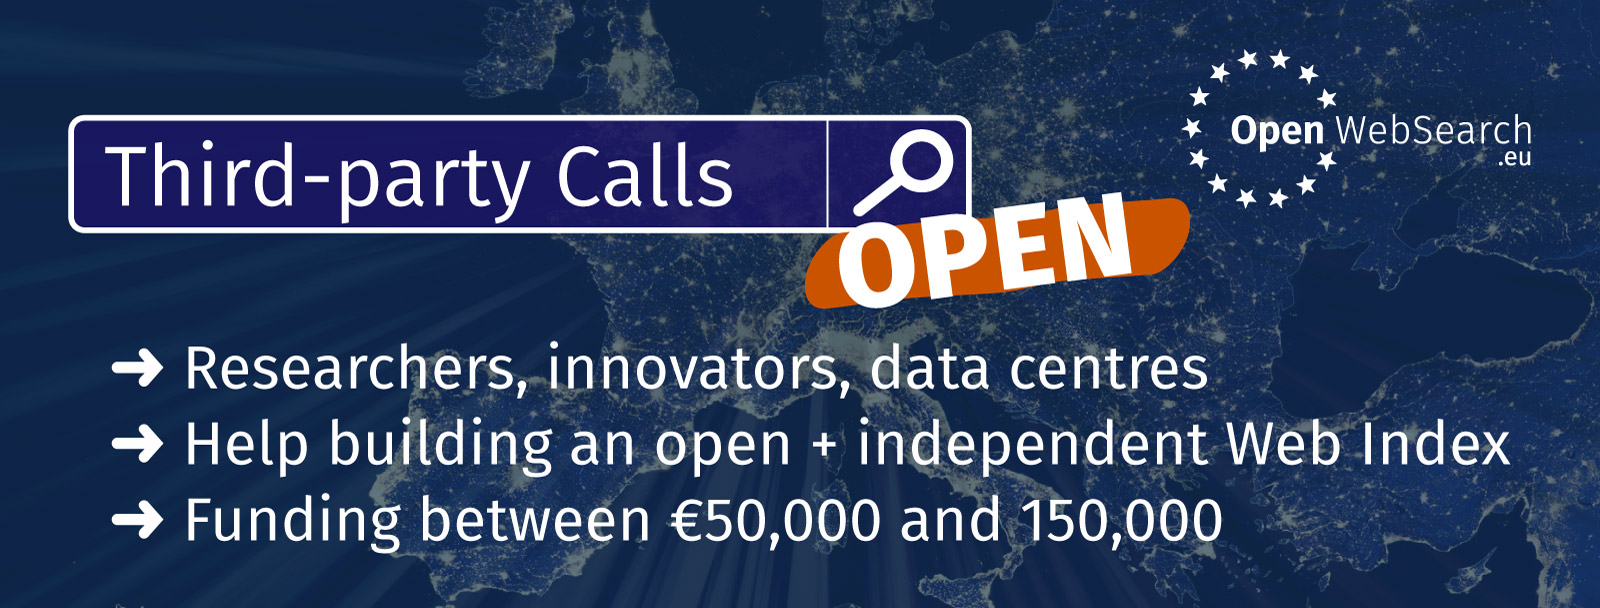 Openwebsearch.eu announcement of third-party open calls. Looking for researchers innovators and datacenters, Help building an open + independent Web Index. Funding offered between 50.000 and 150.00o euro